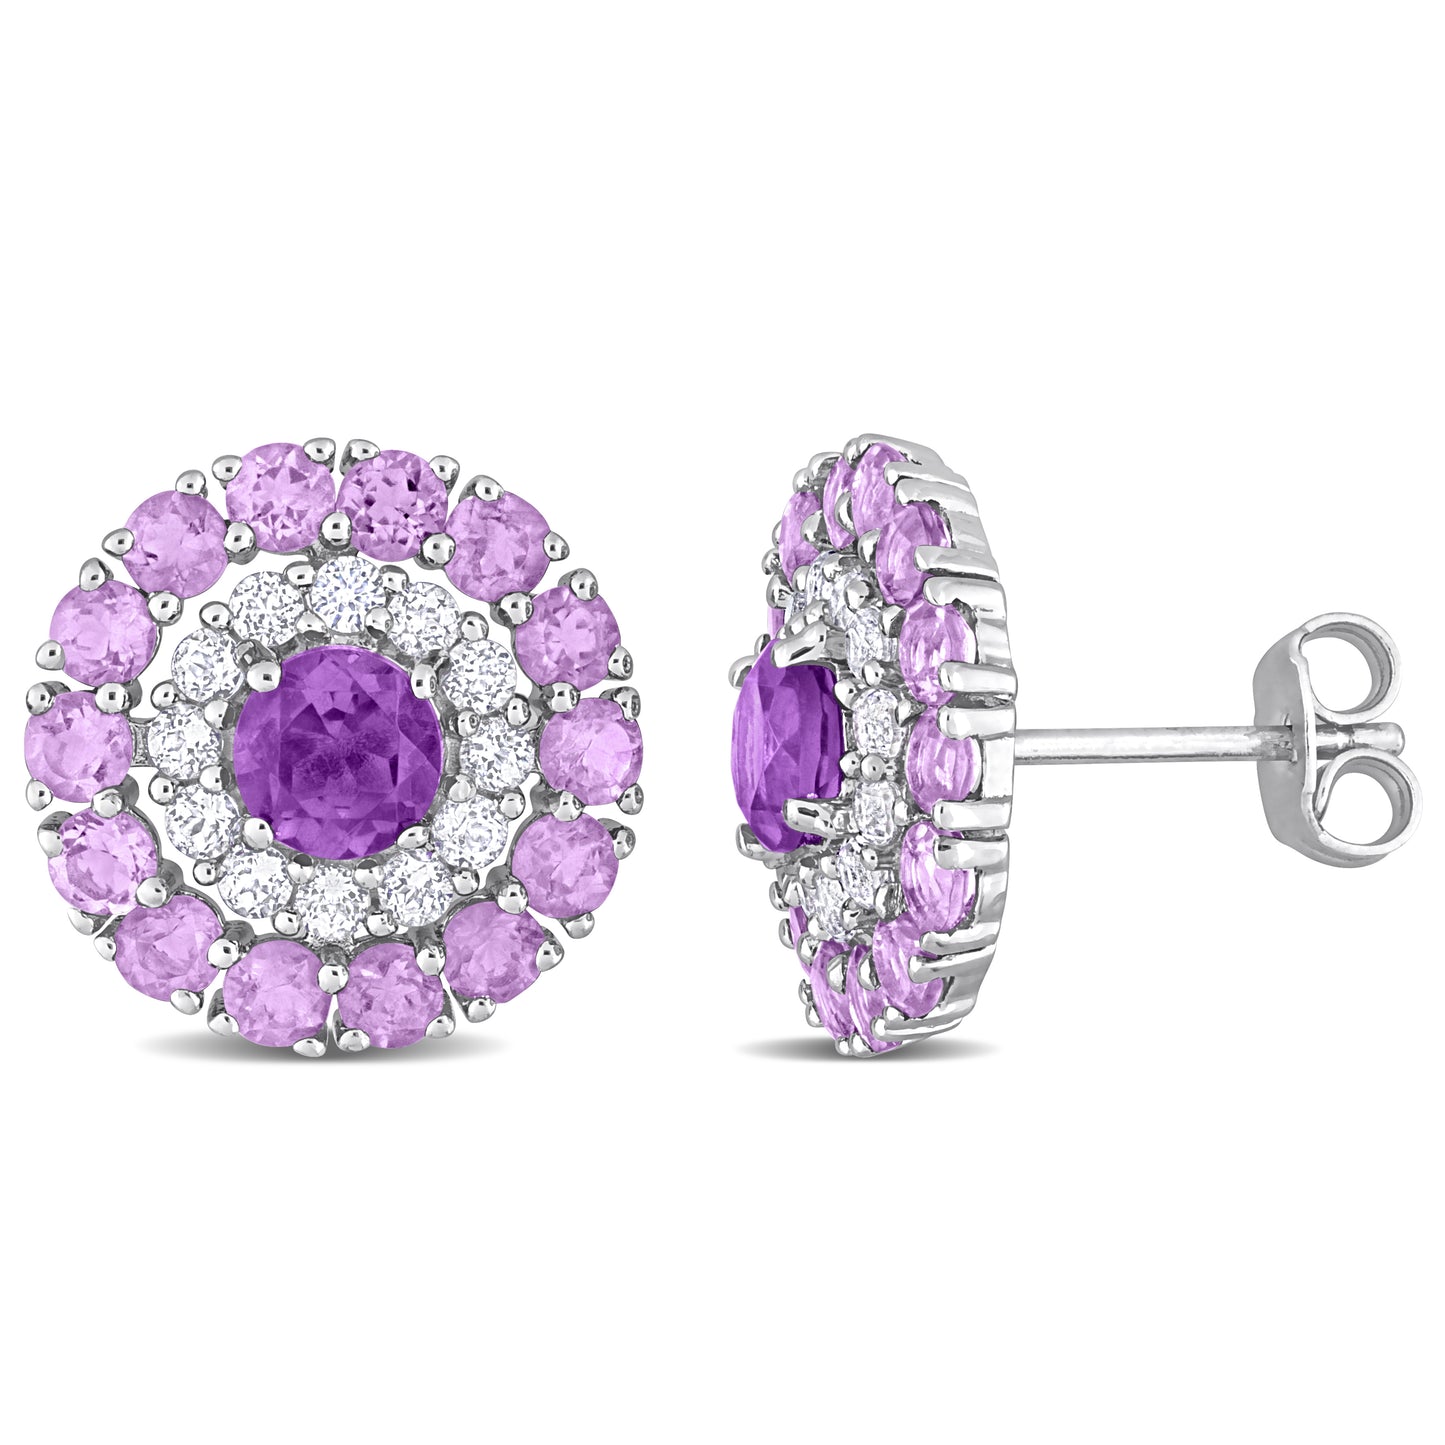 3 1/2ct Amethyst & White Topaz Double Halo Studs in Sterling Silver